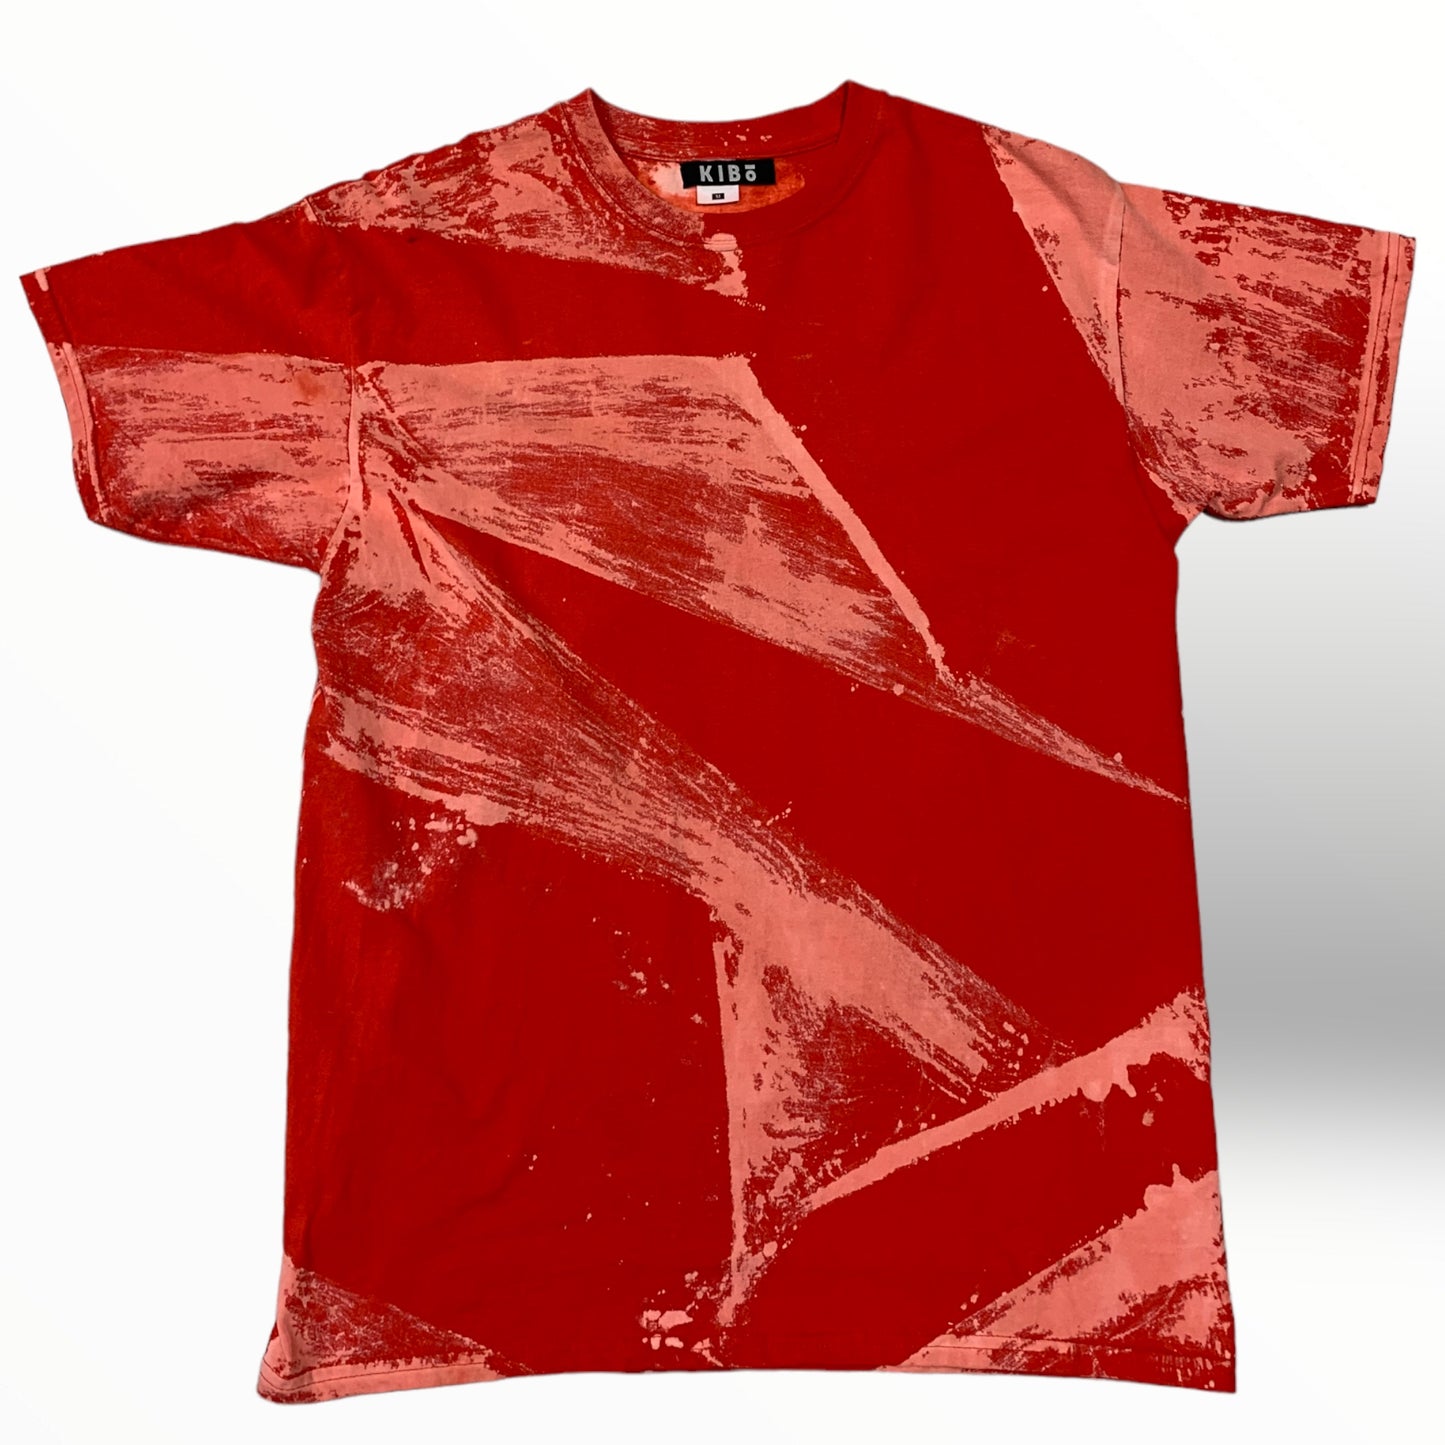 Partxis Red M T-shirt